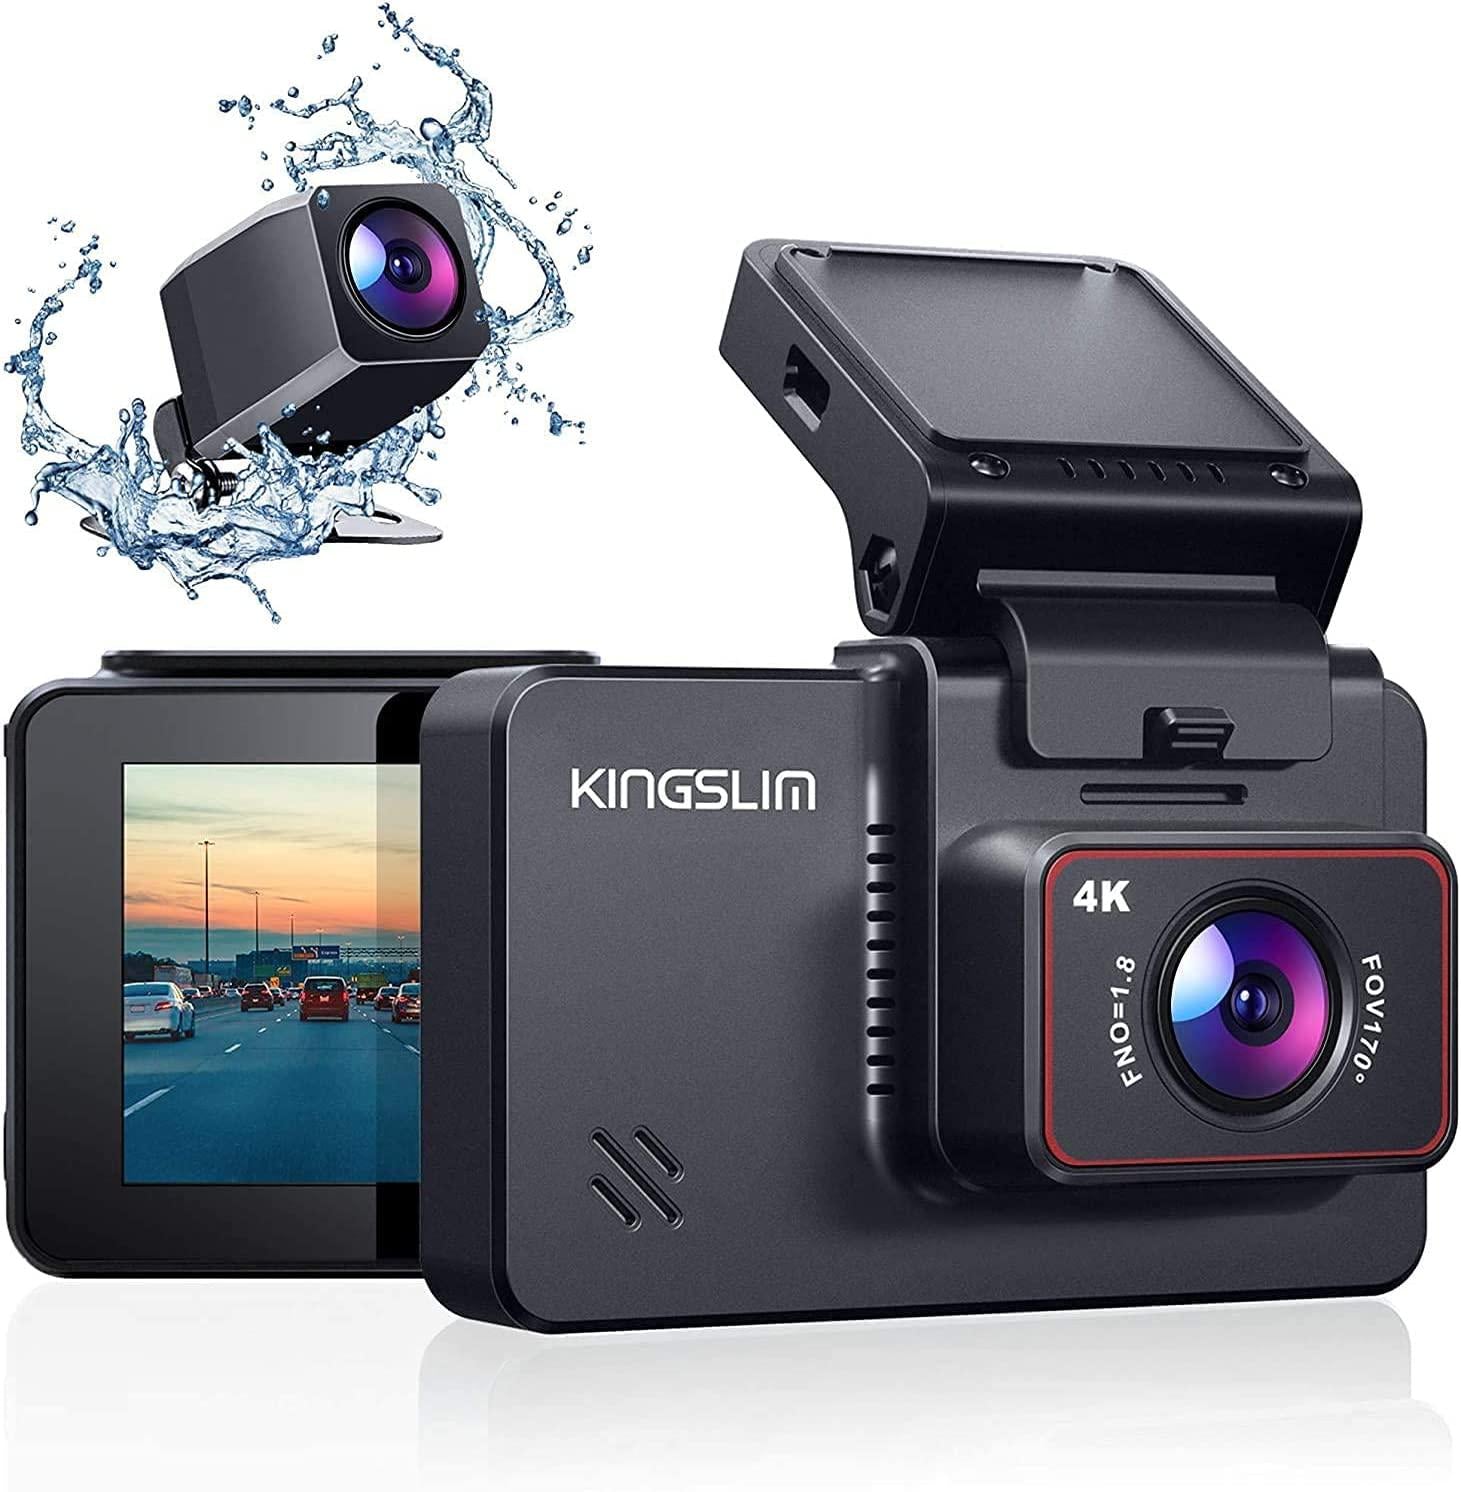 Kingslim, Kingslim 4K Dual Dash Cam with Built-in Wi-Fi GPS - Front 4K/2.5K Rear 1080P Dual Dash Camera for Cars, 3 IPS Touchscreen 170° FOV Dashboard Camera with Starvis Sensor, Support 256GB Max - D4